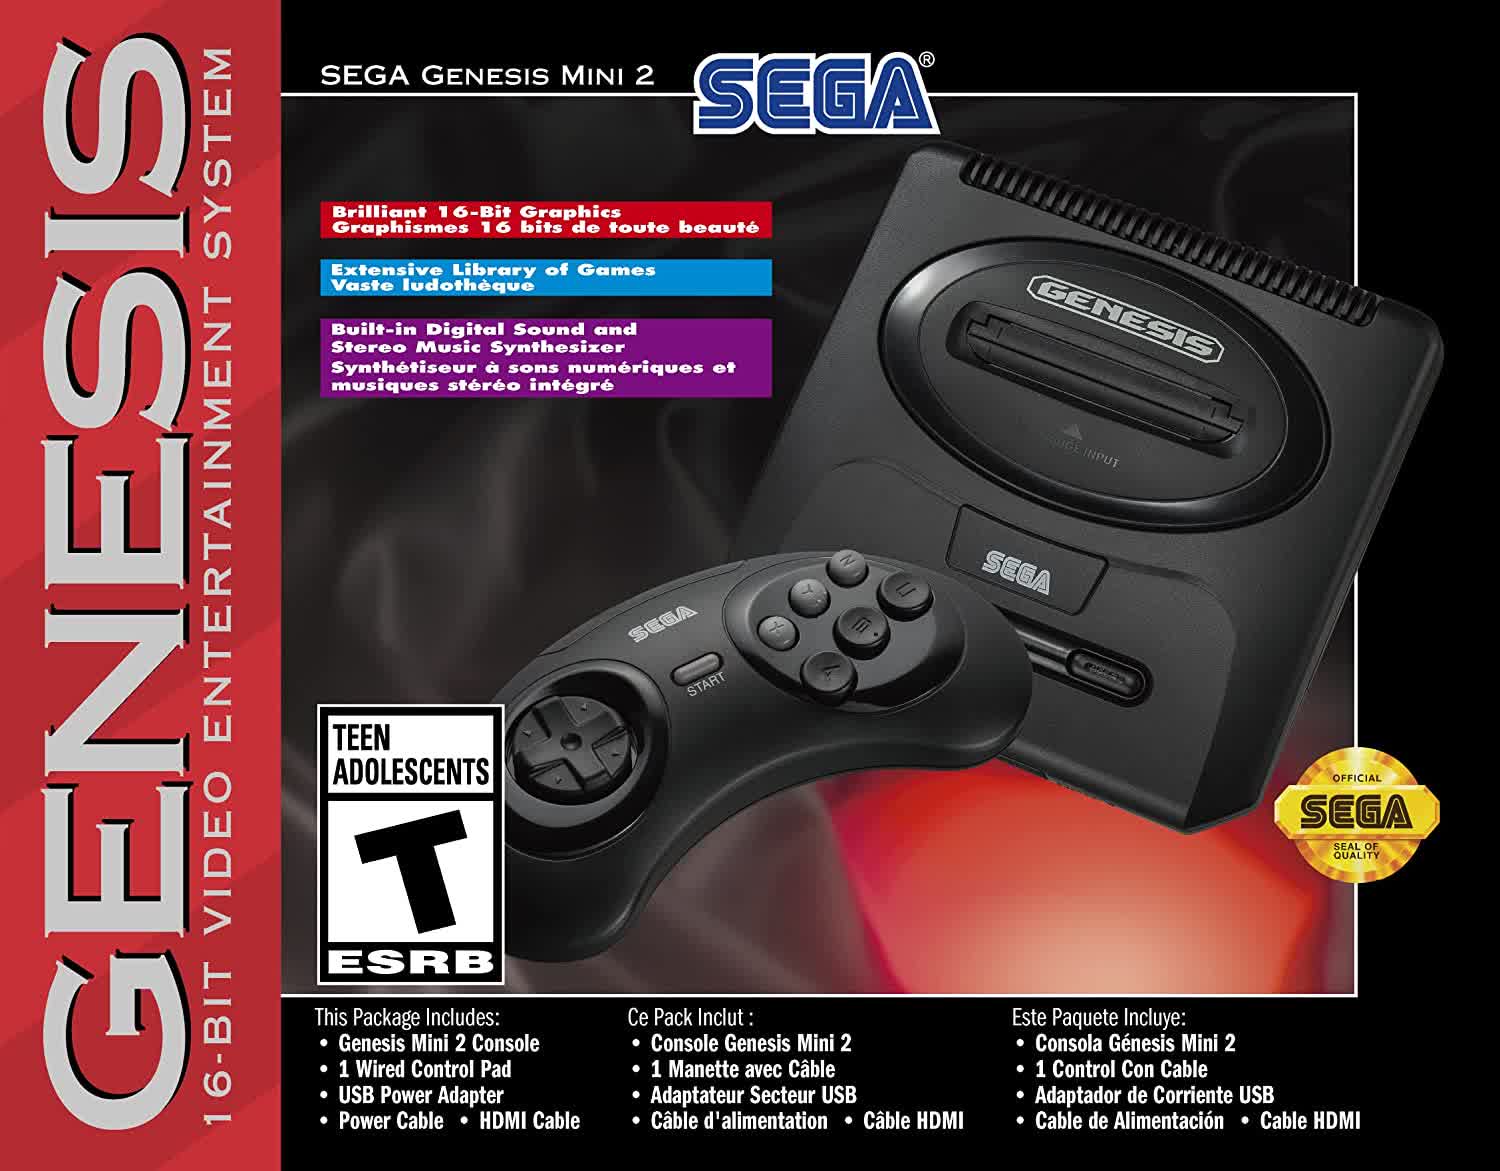 Sega says Genesis Mini 2 will have one-tenth the supply of the original